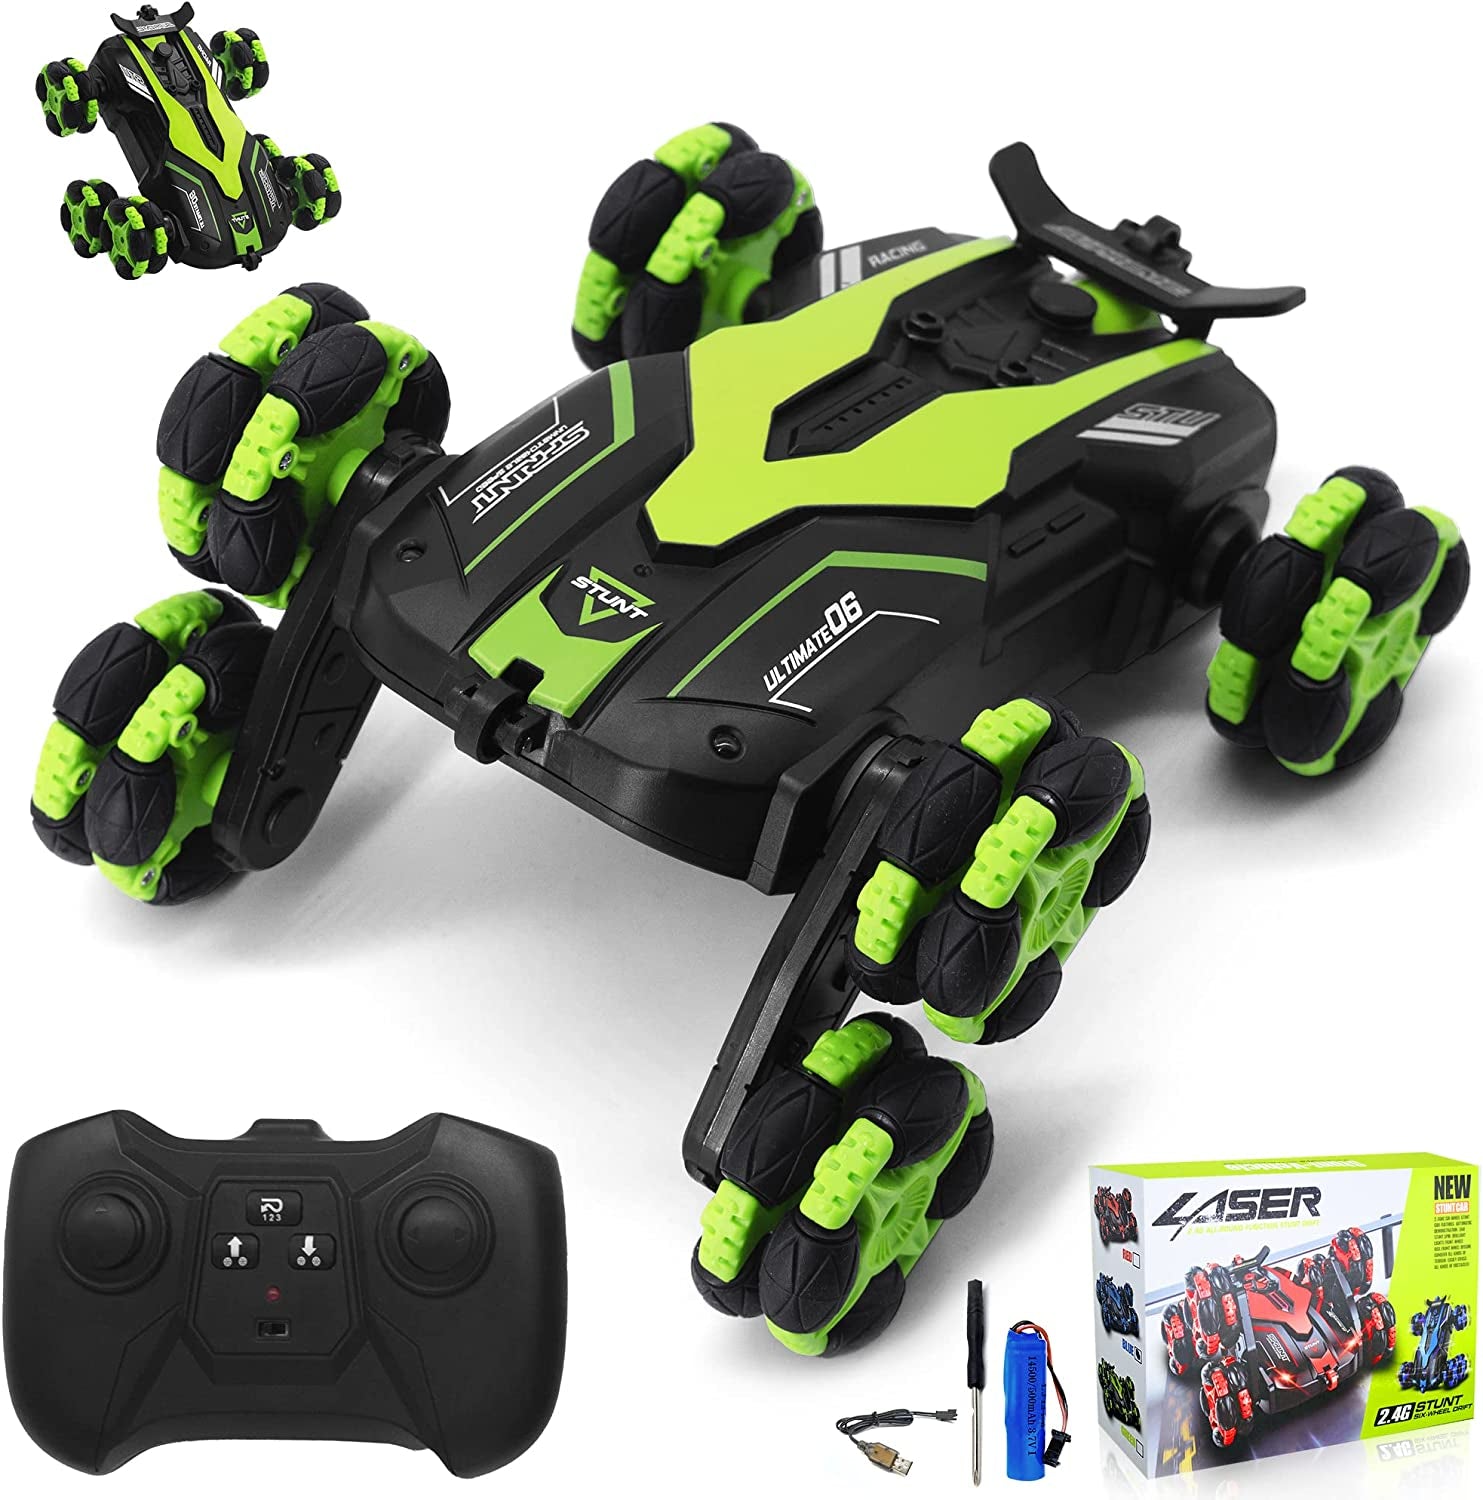 AGV 6-Wheels RC Stunt Cars Deformable Stunt Remote Control Car 2.4Ghz 360° Rotating Trucks with LED Headlights, off Road RC Crawler, 2 Batteries for 60 Mins Play Toy Cars for Boys and Girls (Green)